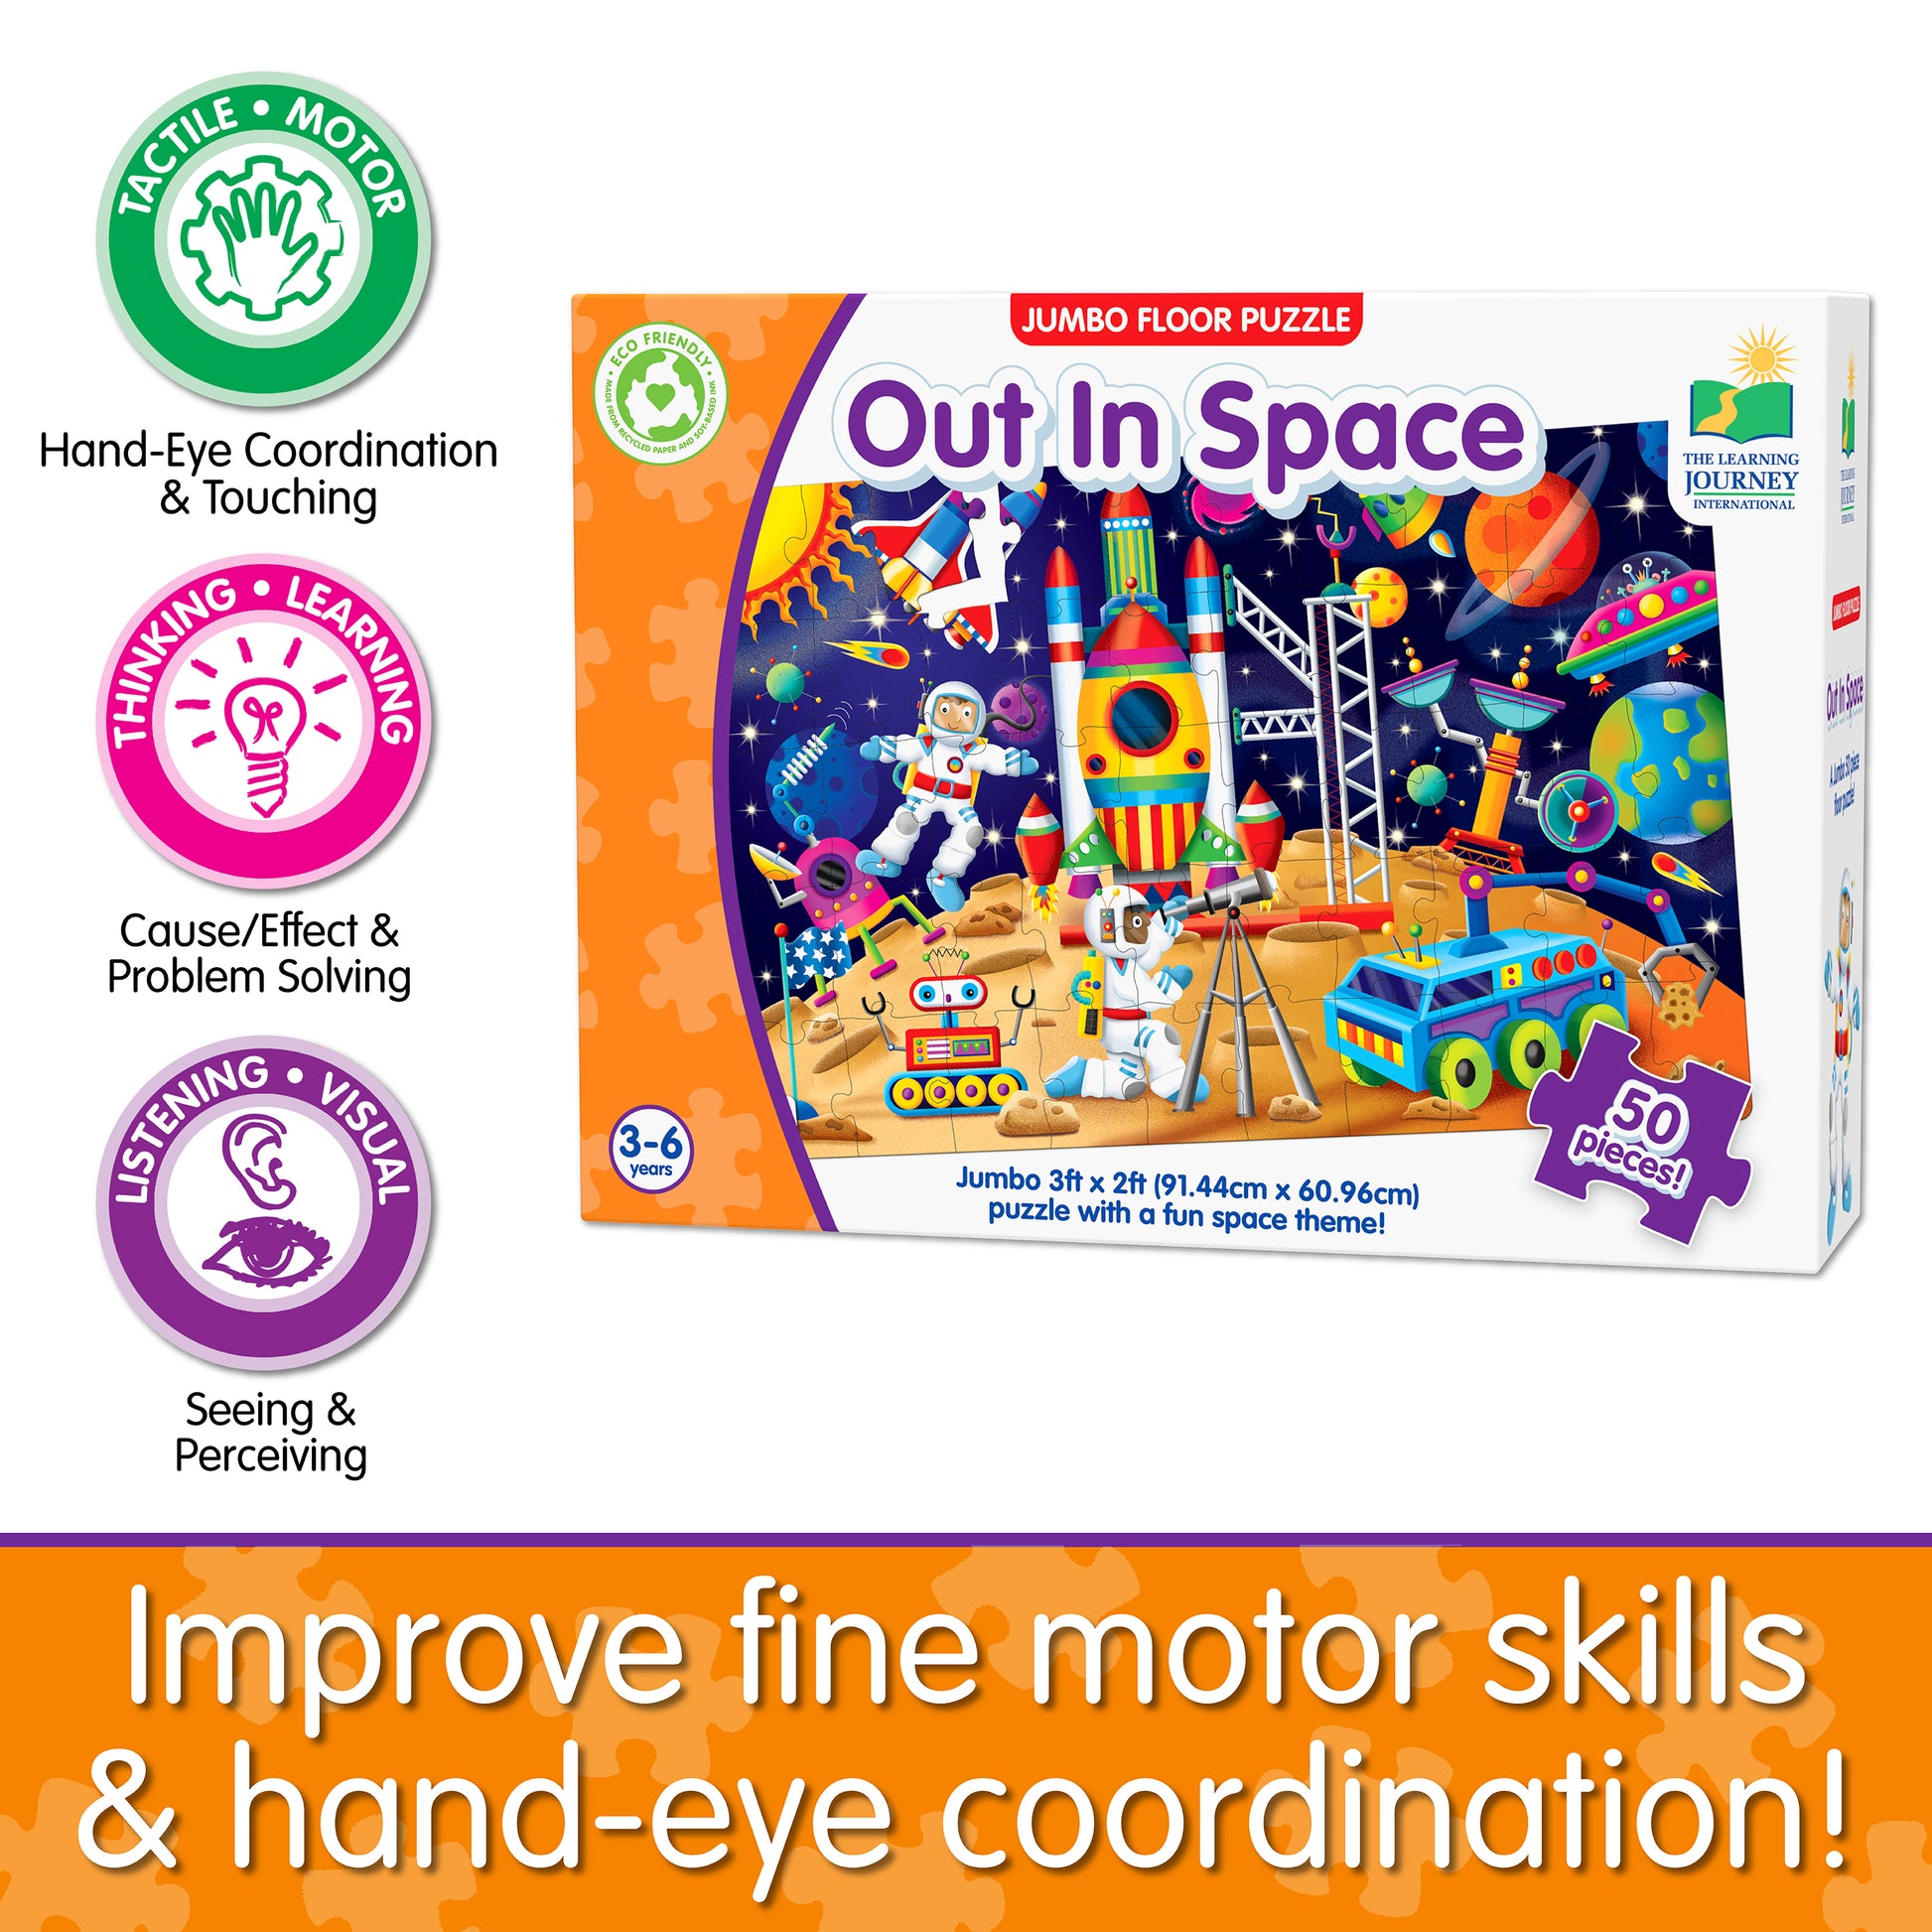 Infographic of Jumbo Floor Puzzle - Out In Space's educational benefits that reads, "Improve fine motor skills and hand-eye coordination!"